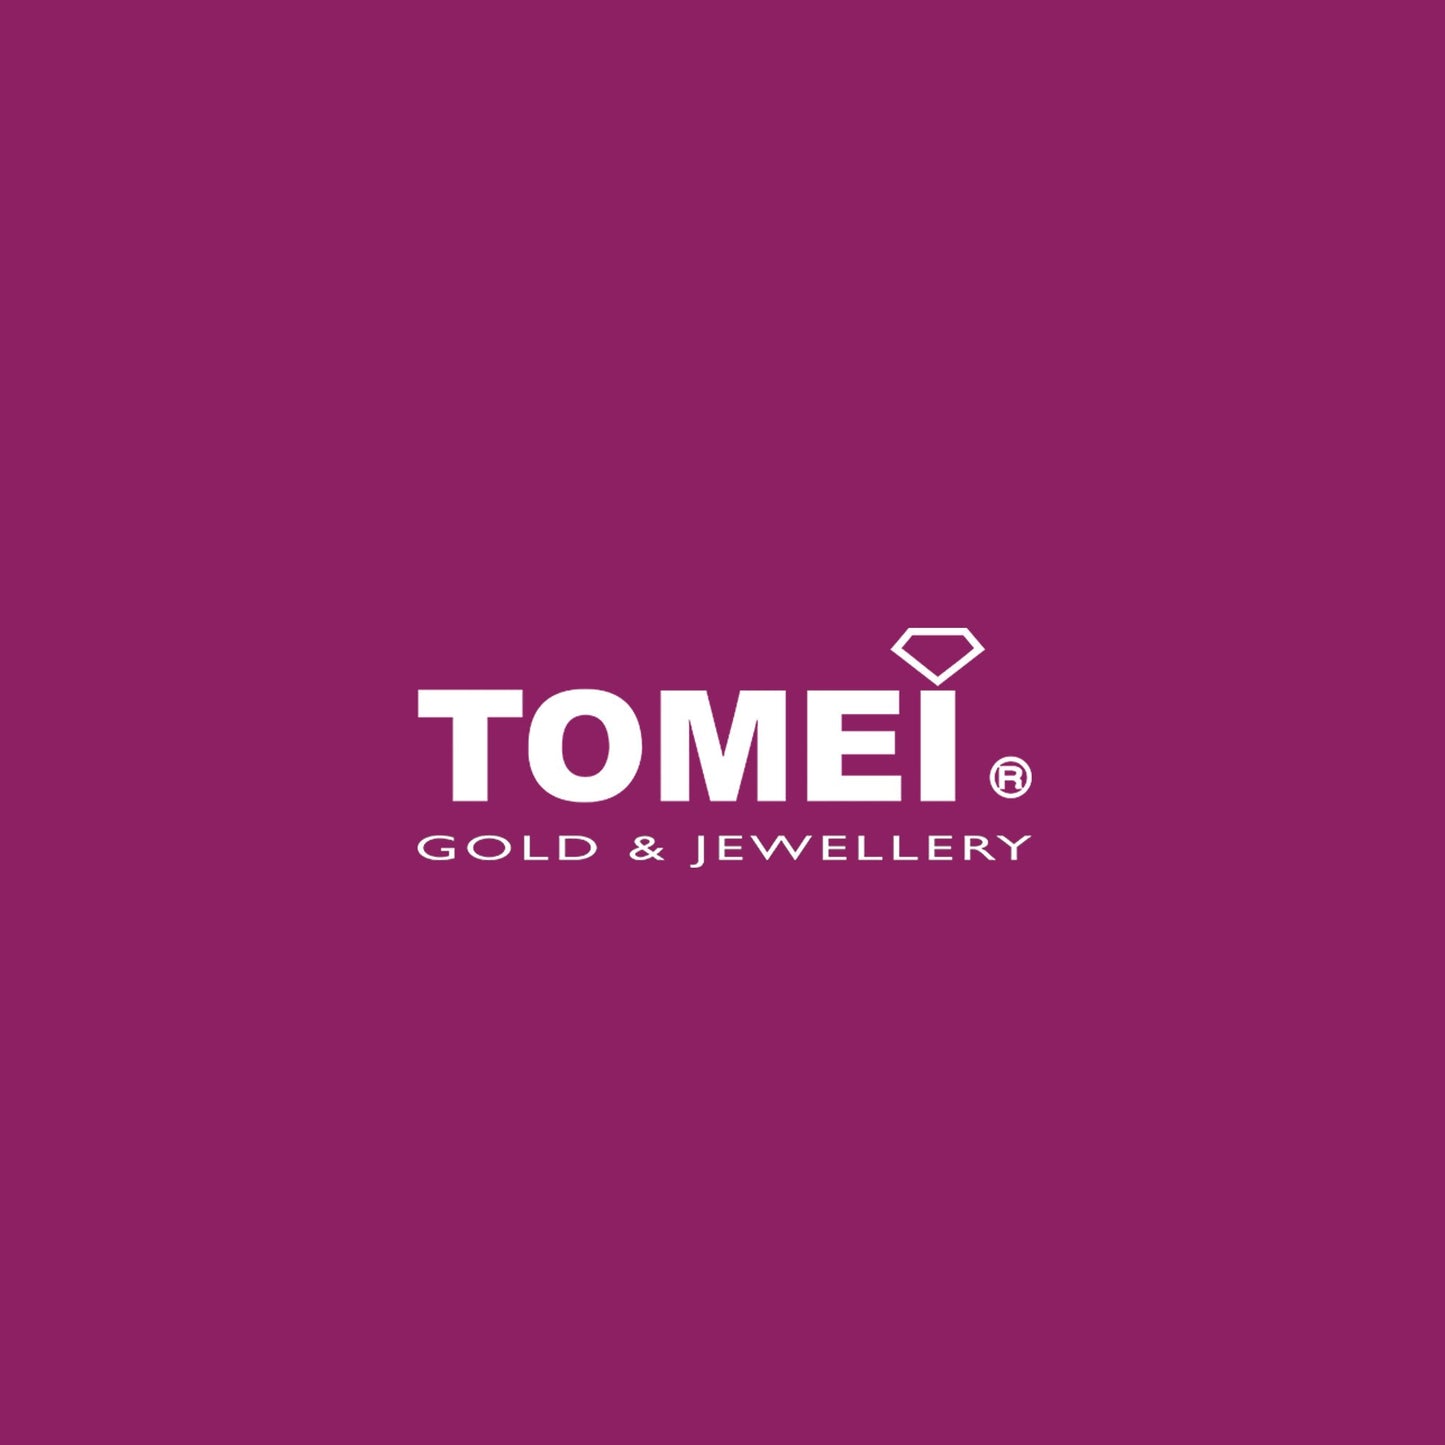 TOMEI Lusso Italia Layered Ring, Yellow Gold 916